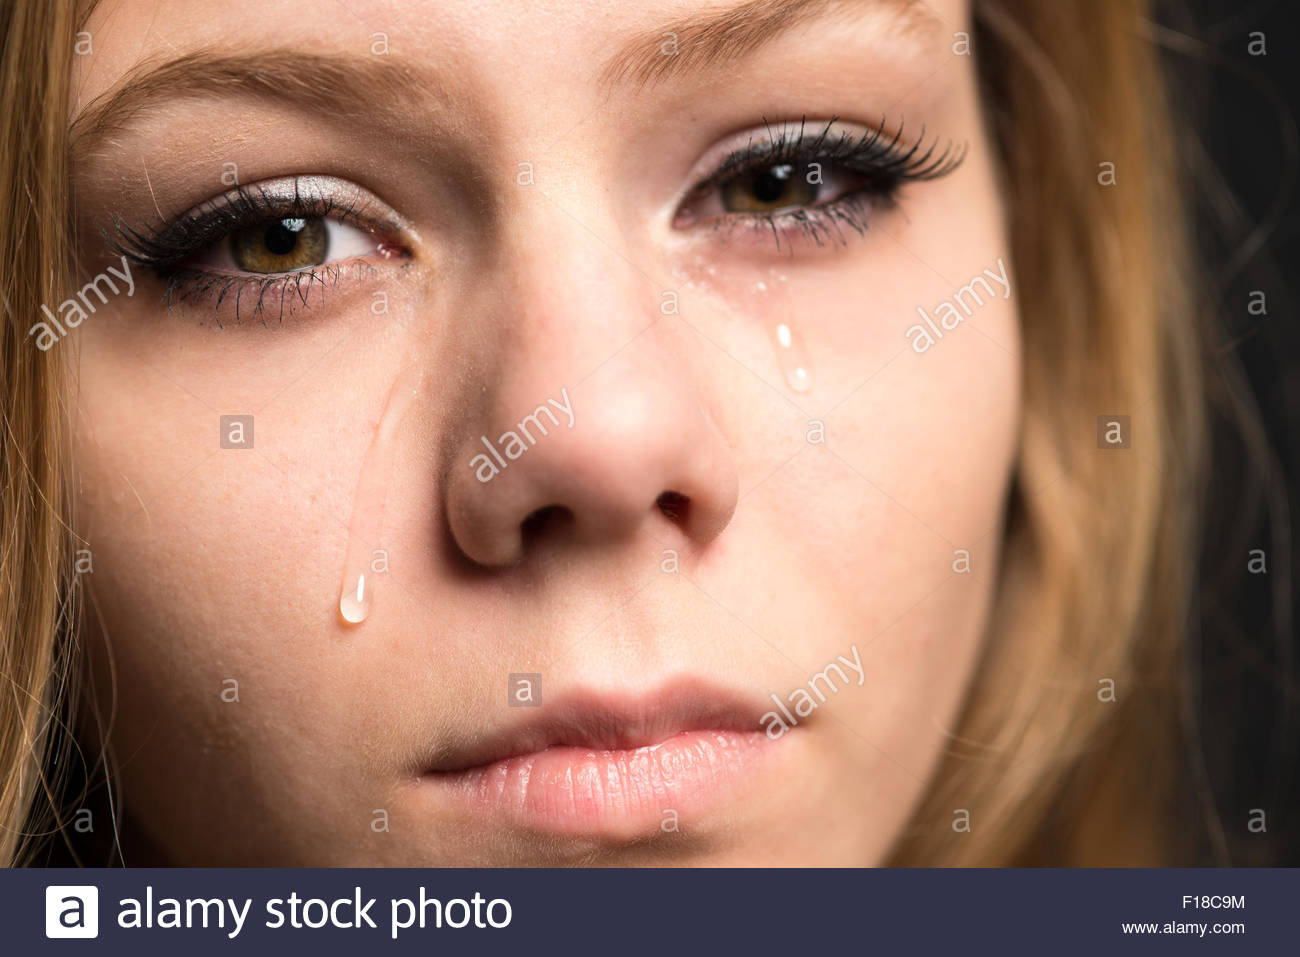 Teen Girl Crying Looking At The Camera With Tears On Hear Cheeks Stock